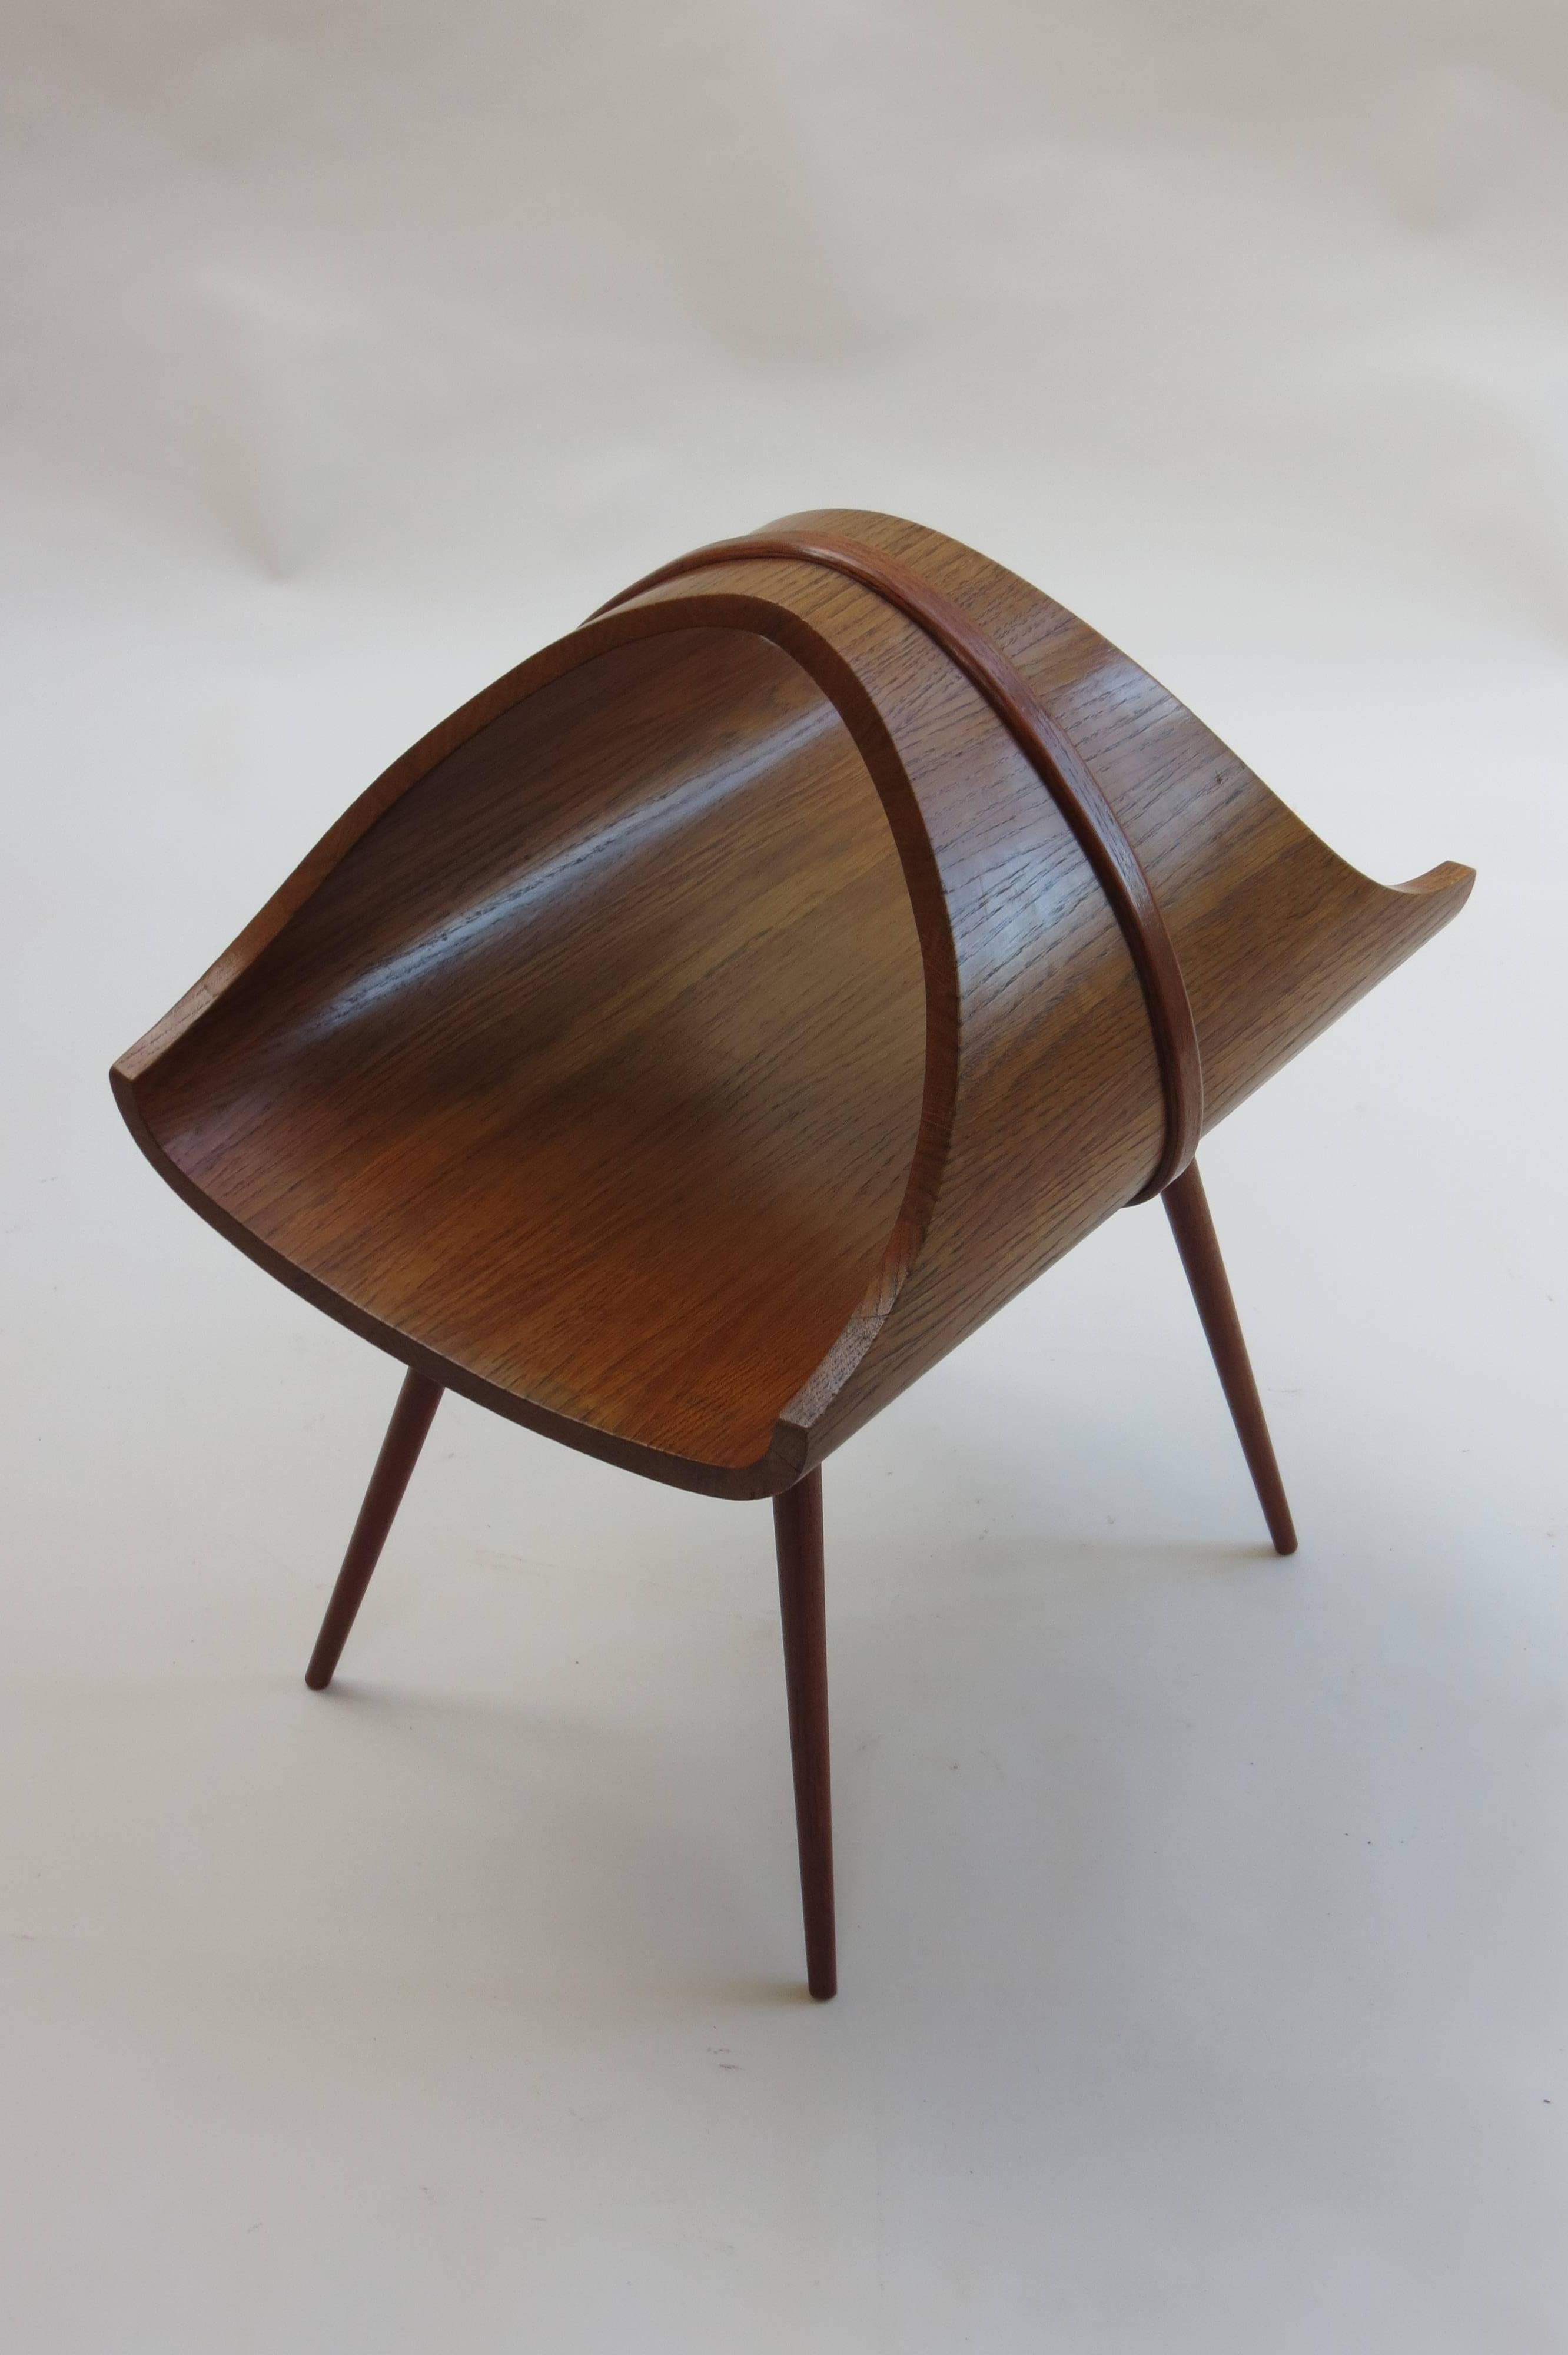 A very fine and beautifully made 1960s magazine holder in the style of Auböck. This one has a lot more finesse than other examples. Made of oak, with a teak band and teak legs. Dated to the underside 2-2-67.
Could also be used in a bathroom to store